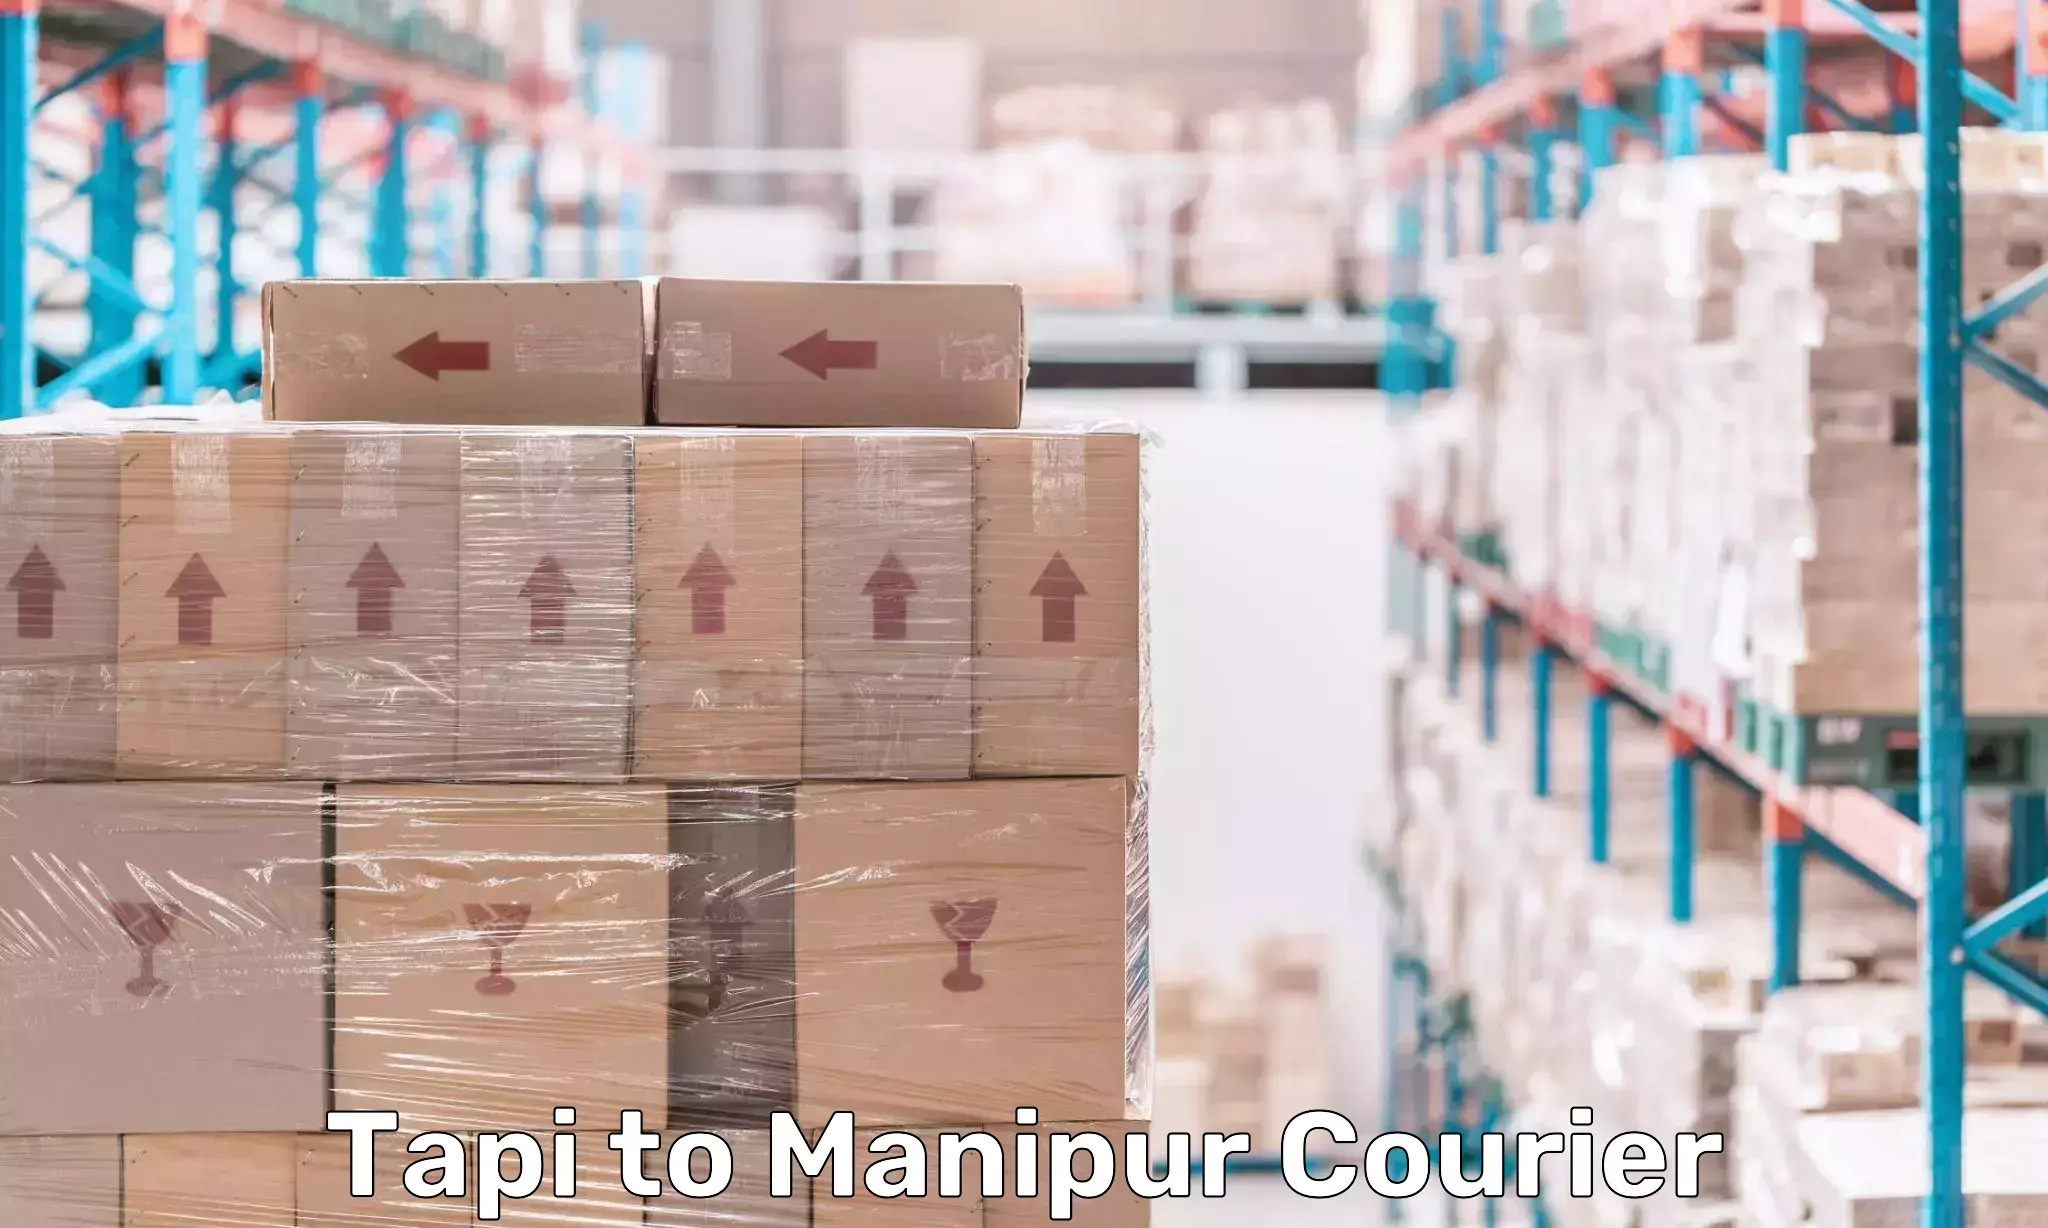 State-of-the-art courier technology Tapi to Manipur